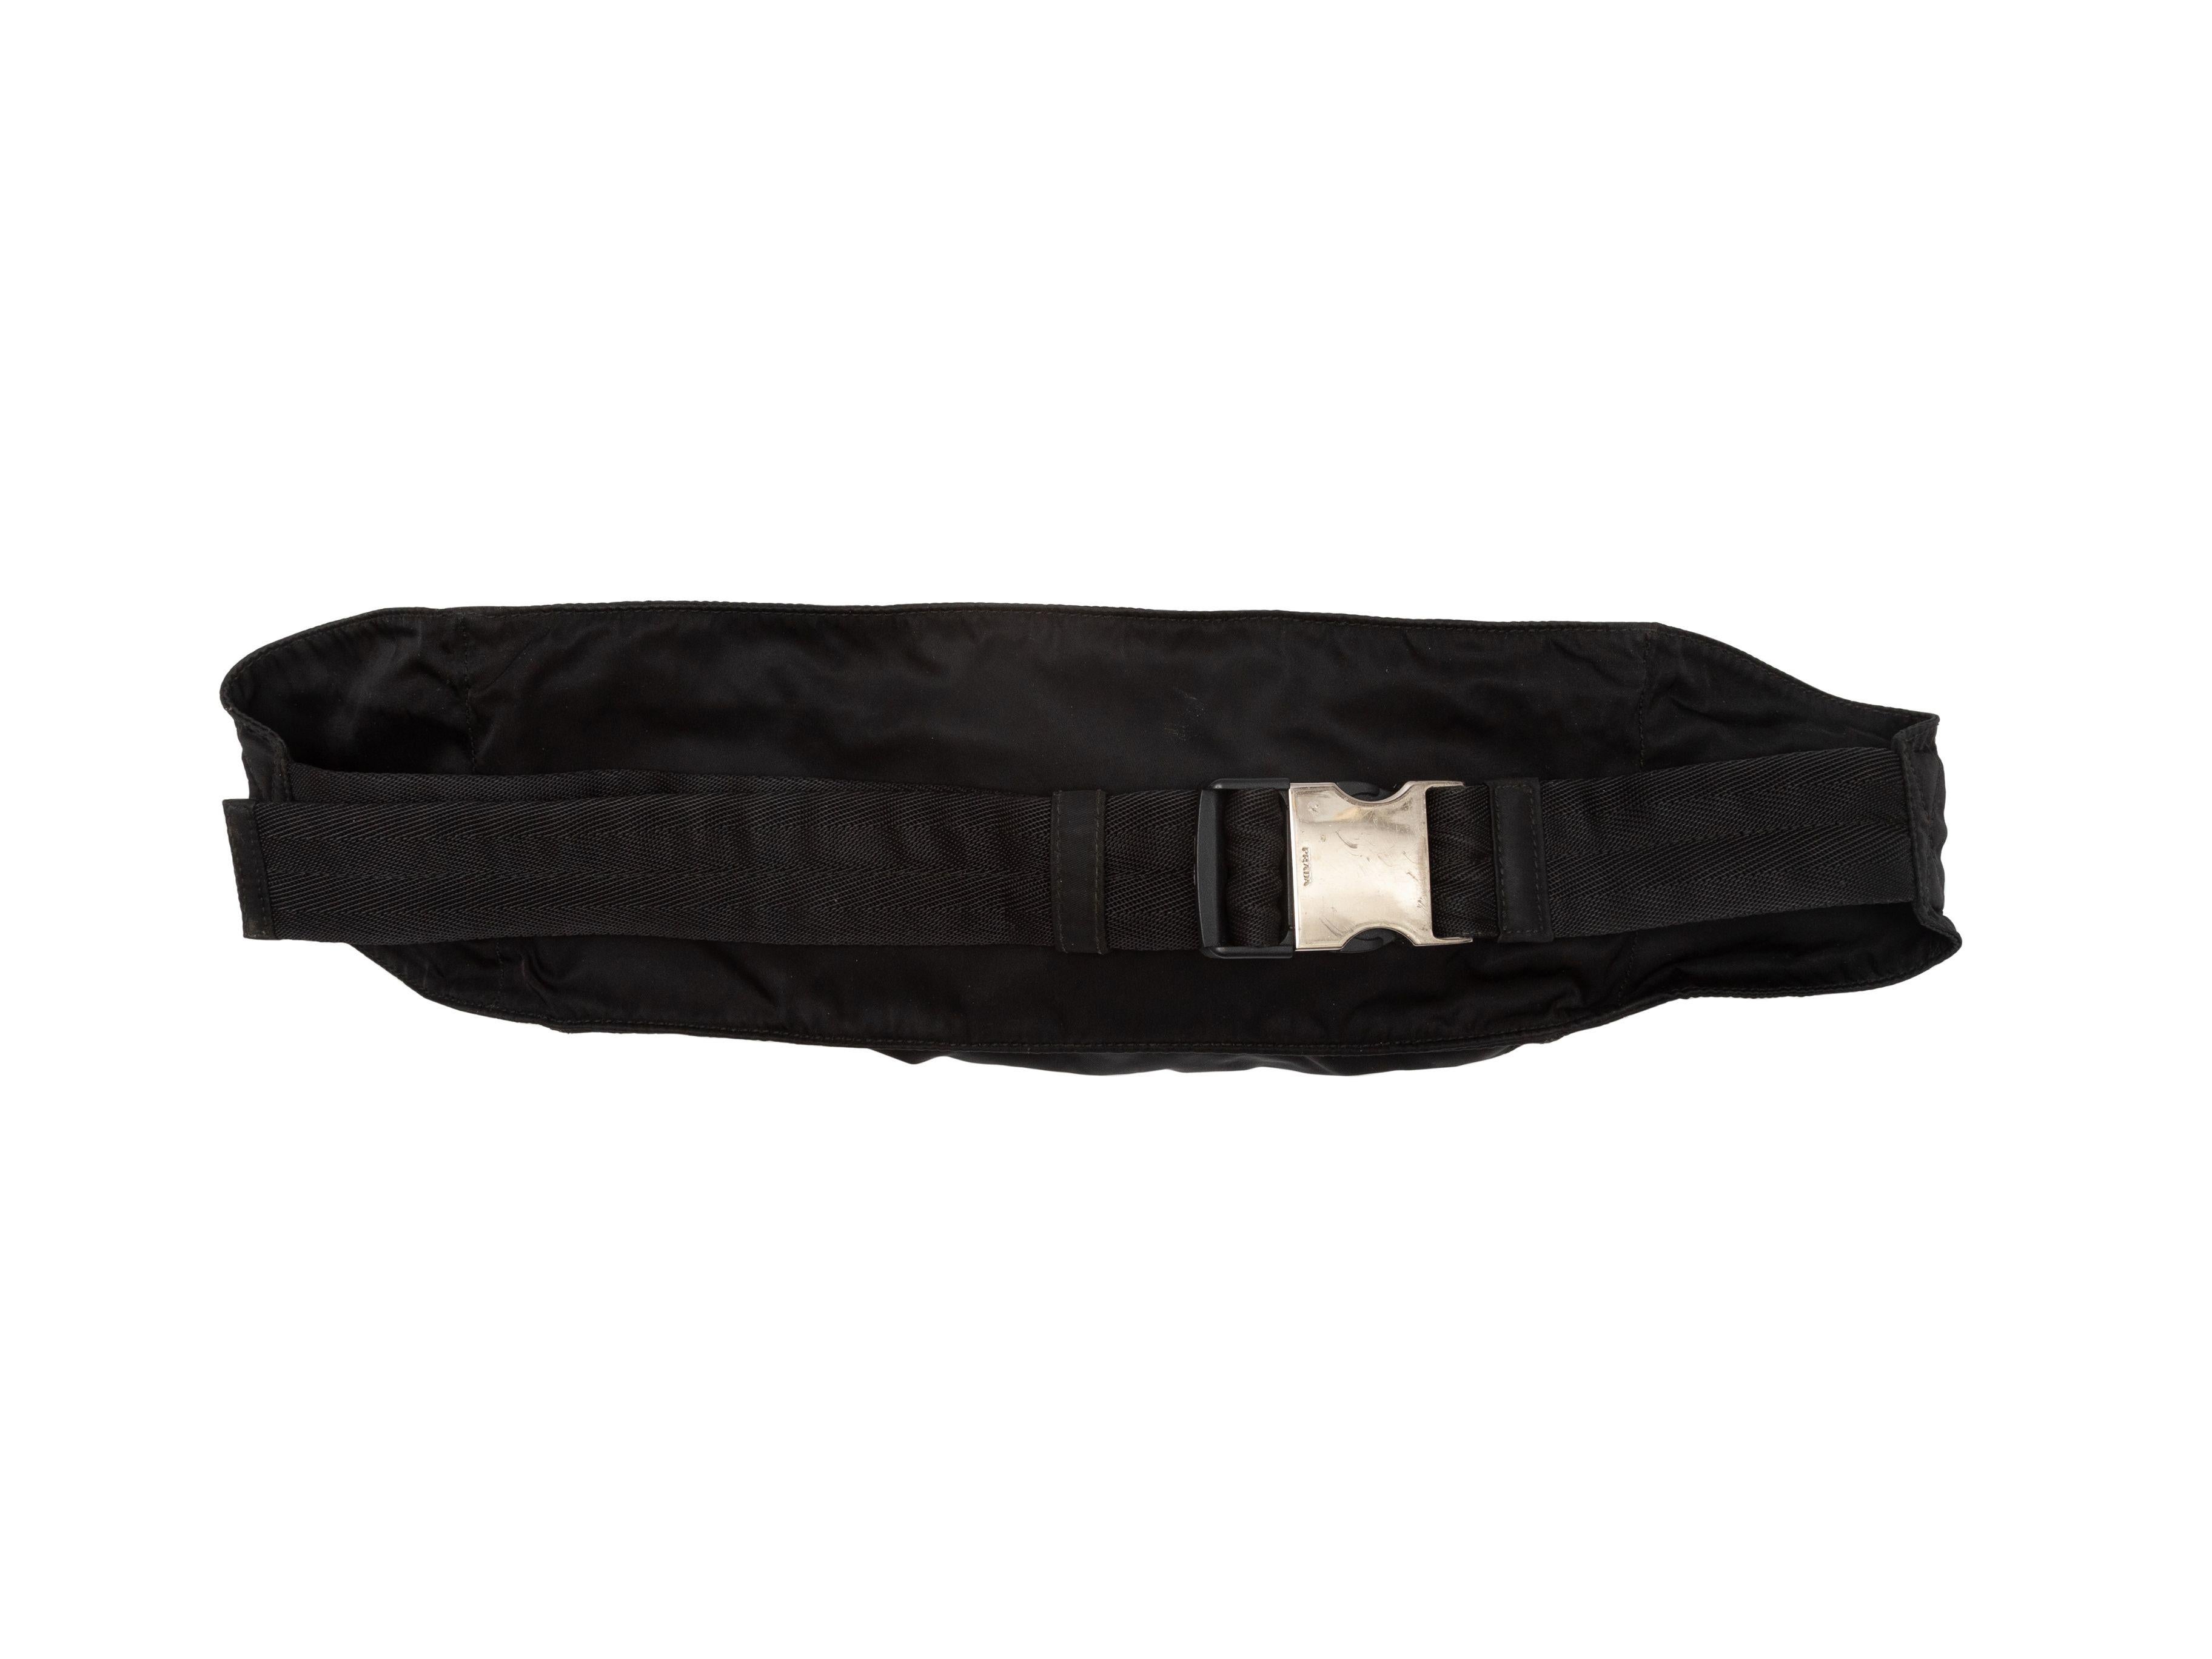 Product Details: Black Prada Nylon Waist Bag. This bag features a nylon body, dual front zip pockets, and a silver-tone buckle closure. 15